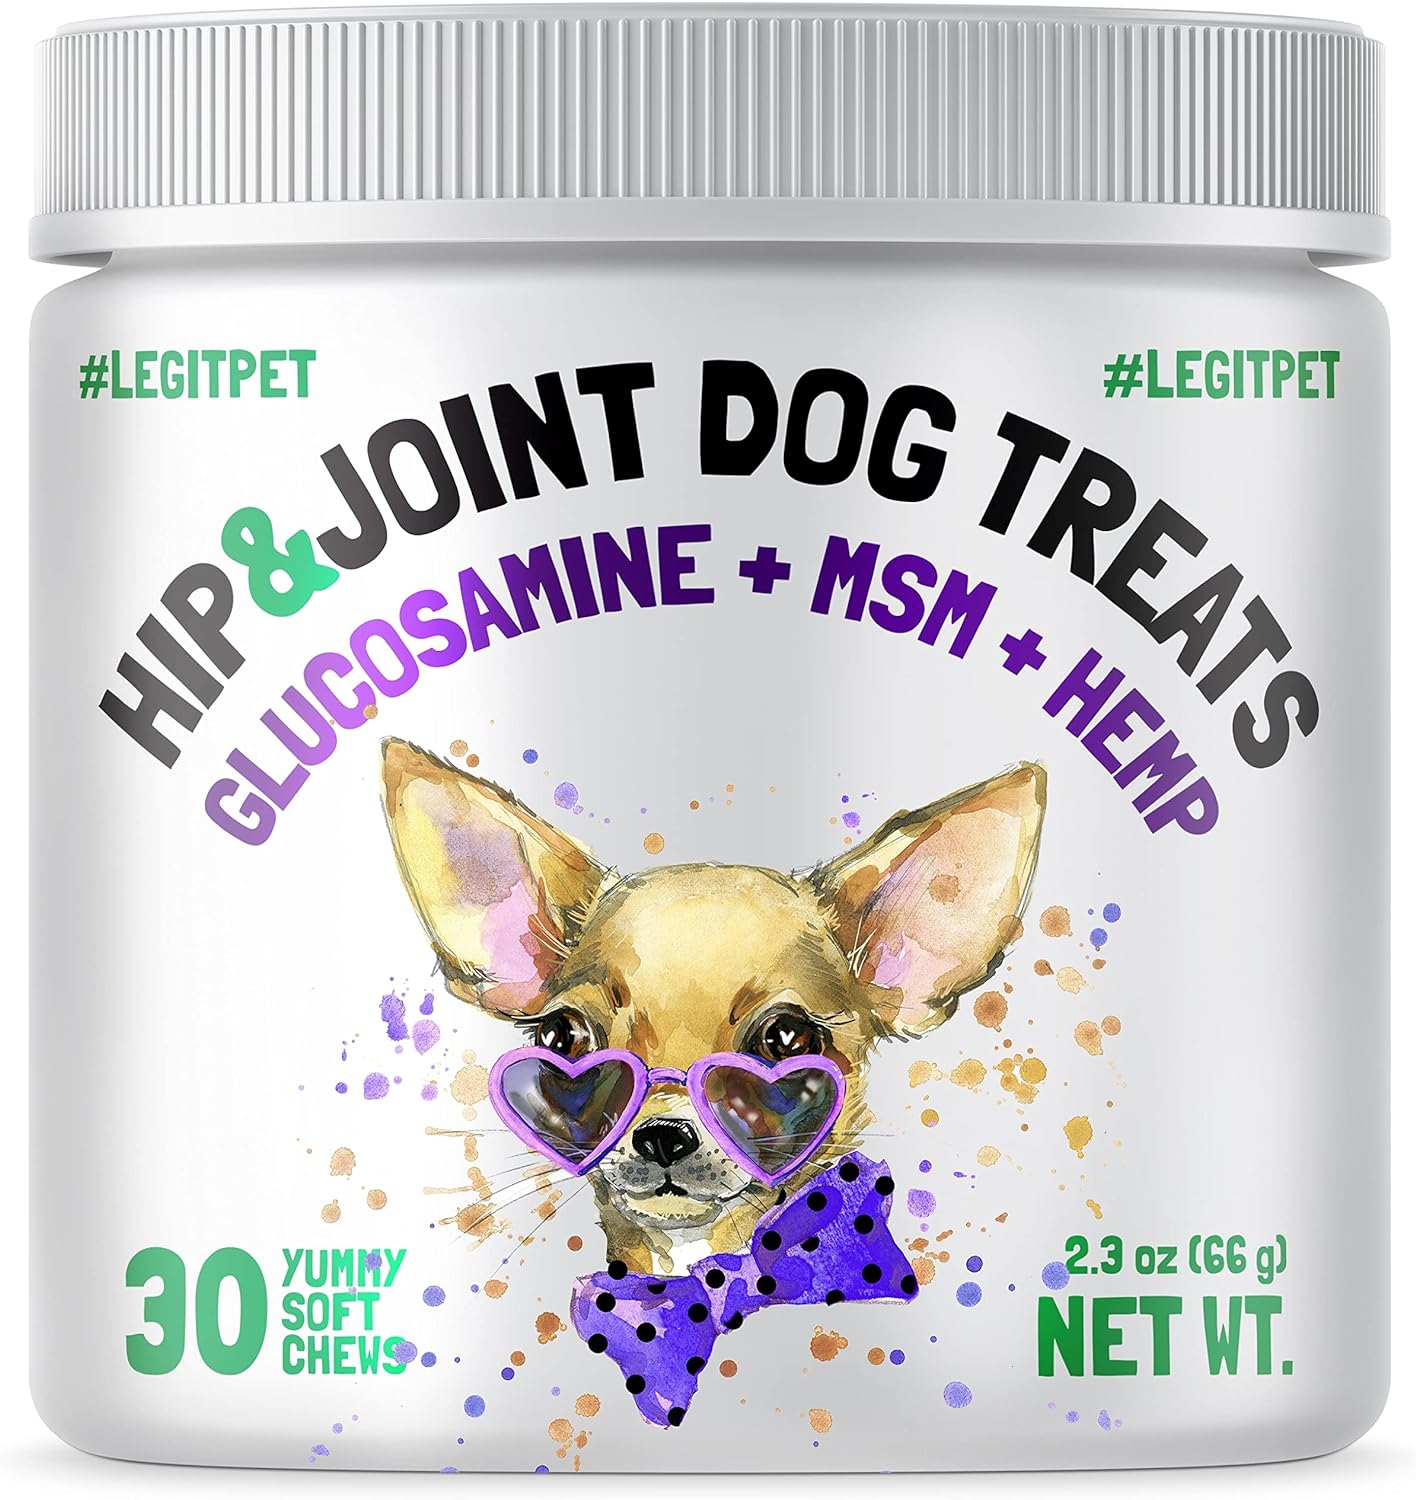 Hemp Hip & Joint Supplement for Dogs 30 Soft Chews Made in USA Functional Glucosamine for Dogs Chondroitin MSM Turmeric Hemp Seed Oil Natural Pain Relief Mobility Advanced Joint Health for All Breeds